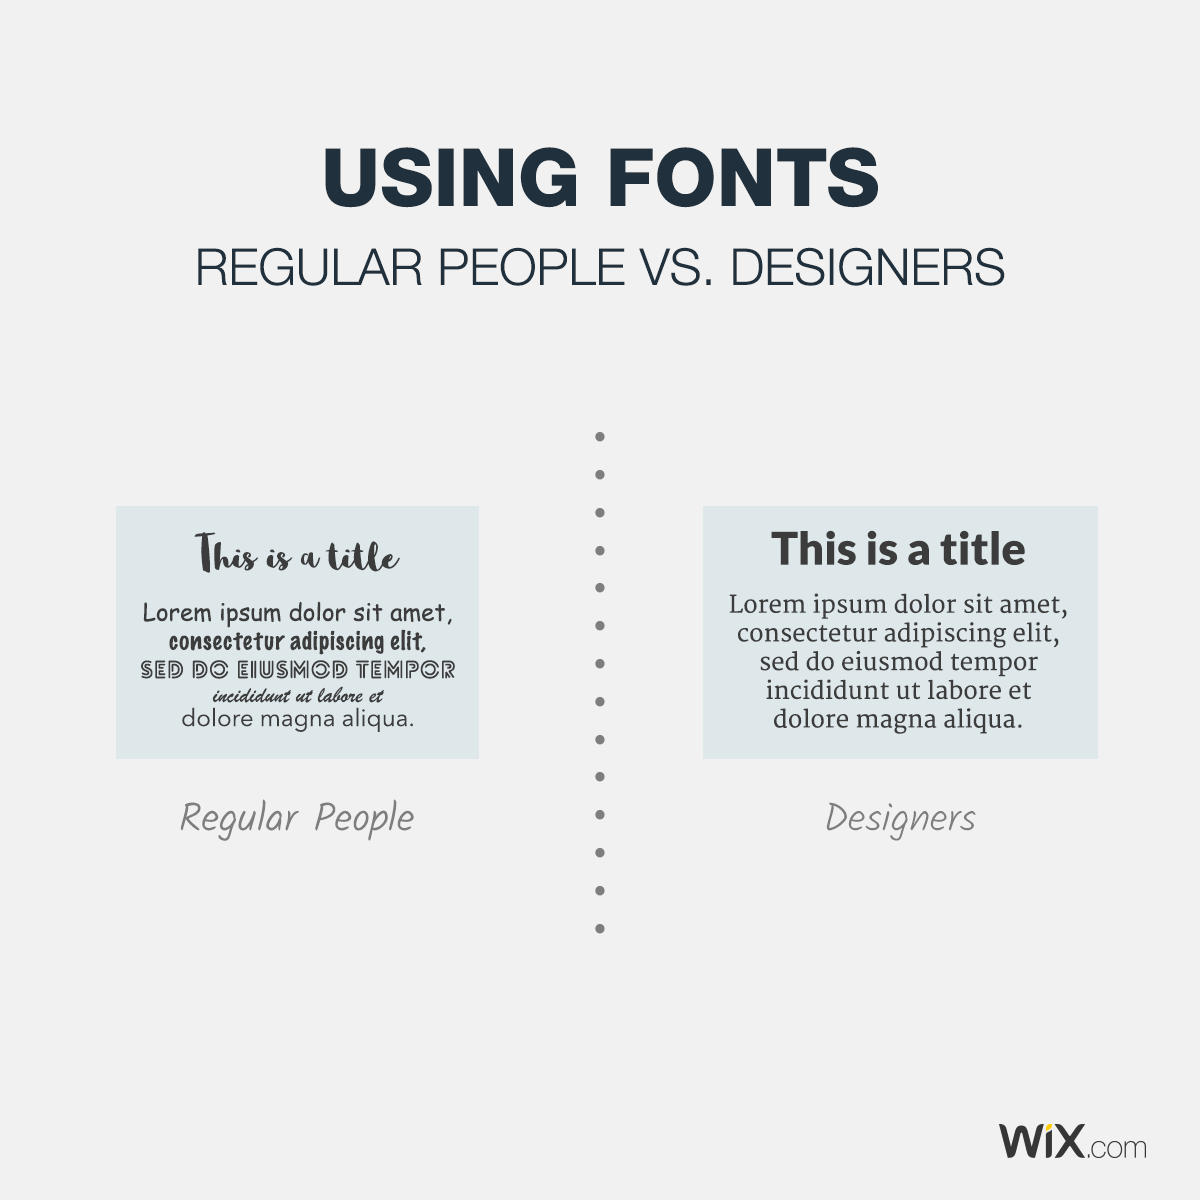 Differences Between Designers and Non-Designers - Fonts